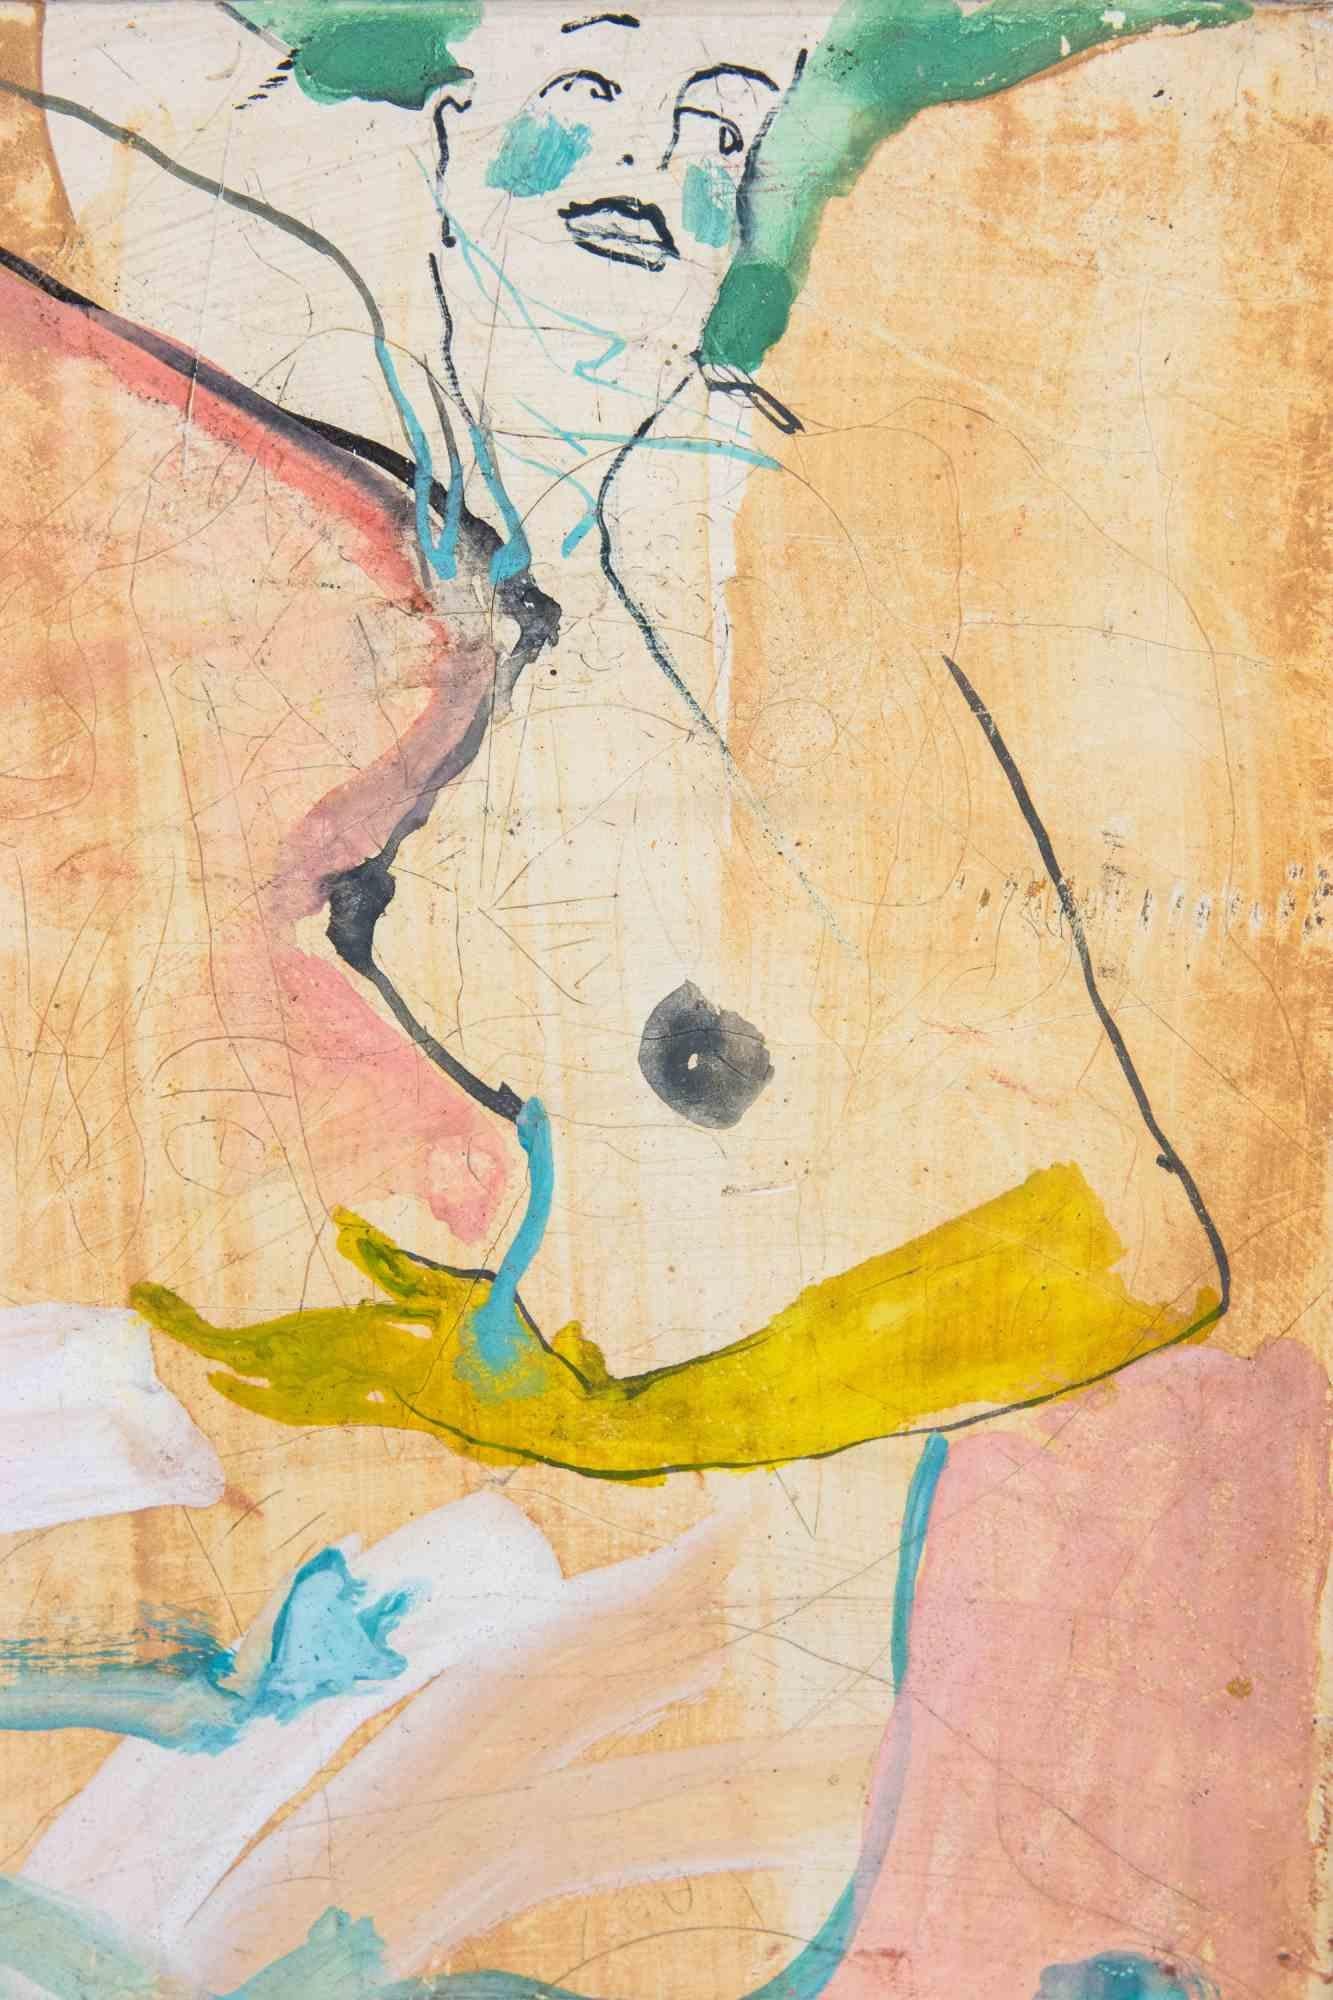 A woman is a contemporary artwork, realized in 2018 by the emerging artist Anastasia Kurakina.

Mixed colored watercolor and china ink drawing on panel.

Good conditions.

Hand signed on the lower margin.

